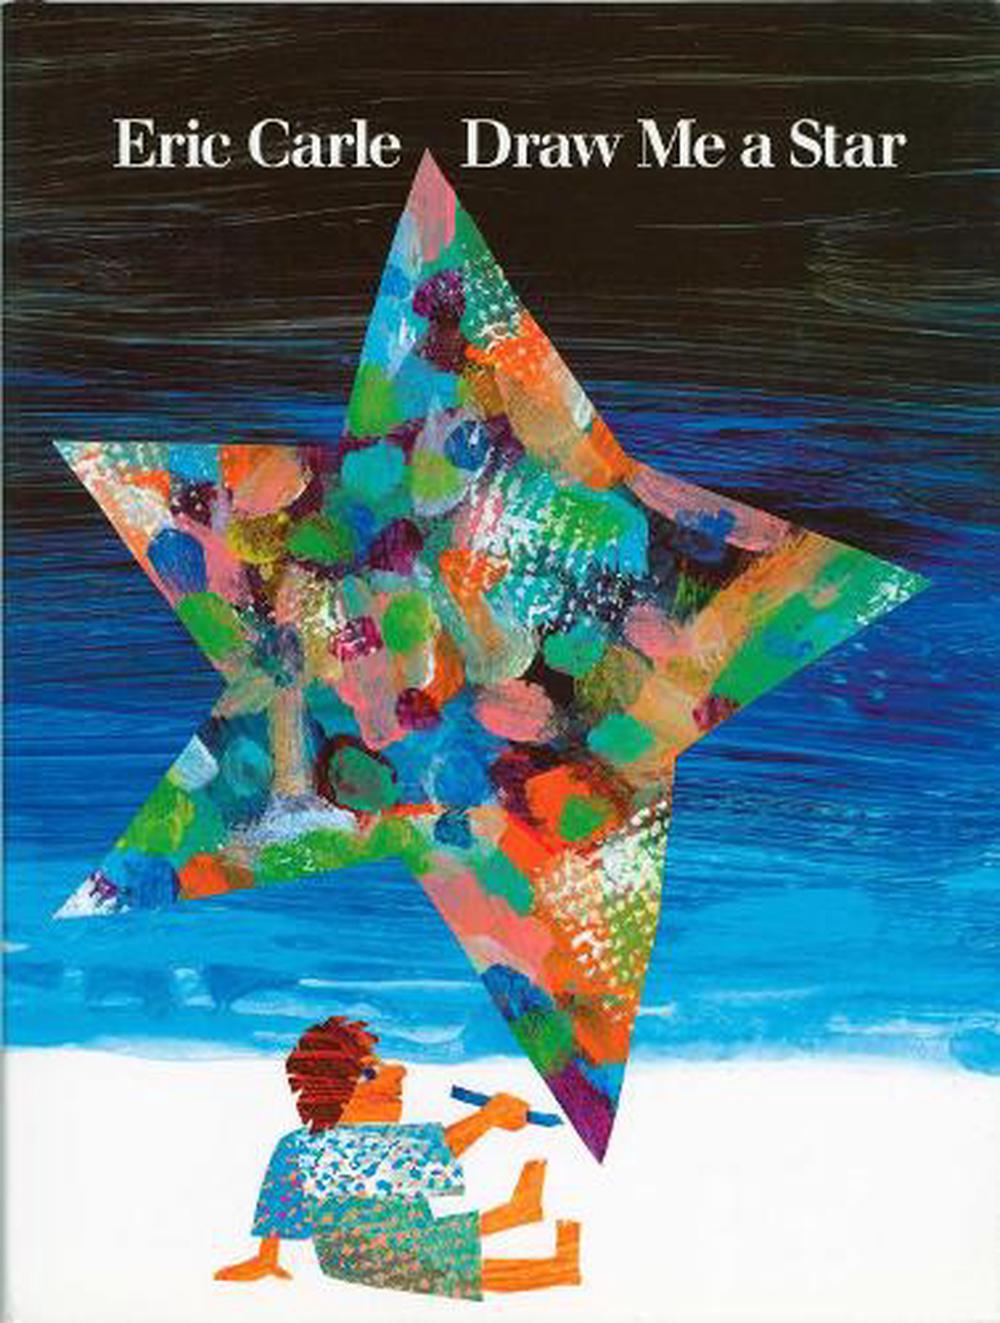 Draw Me a Star by Eric Carle (English) Hardcover Book Free Shipping